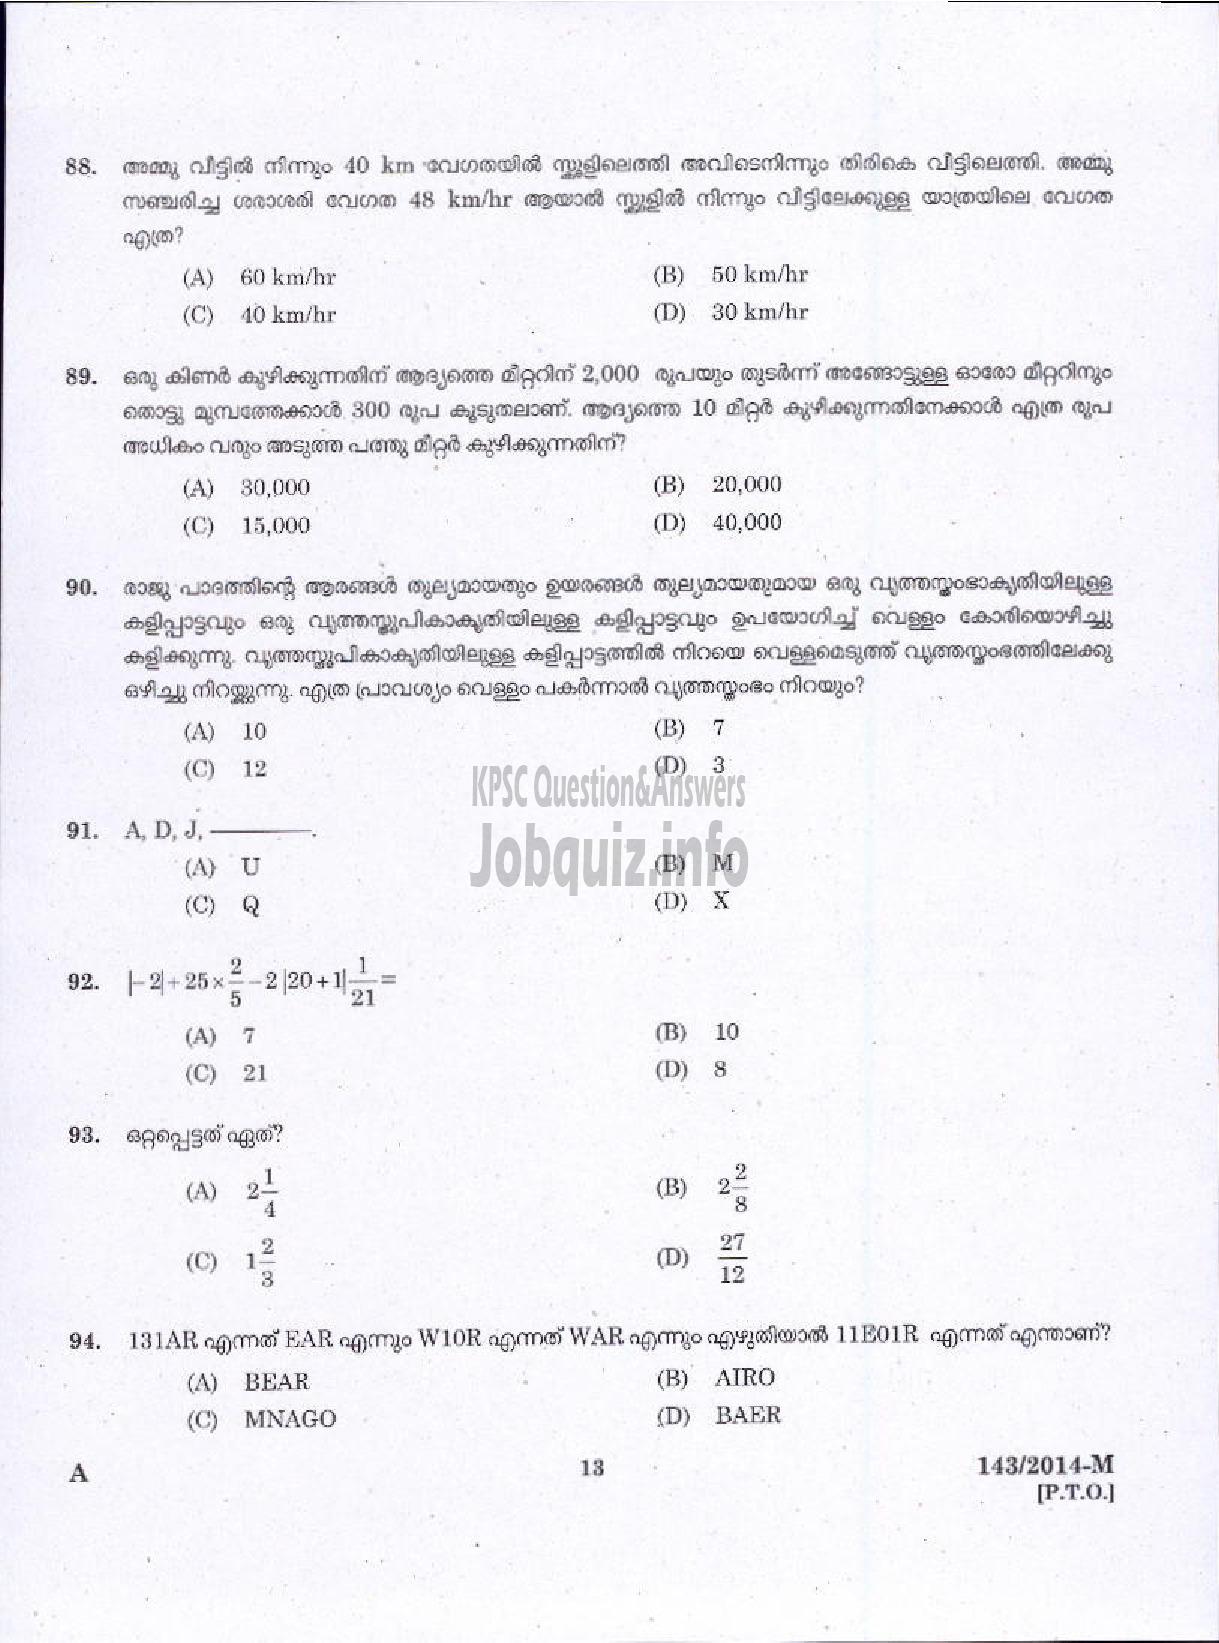 Kerala PSC Question Paper - WOMEN POLICE CONSTABLE APB POLICE MALE WARDER JAIL TSR AND KNR UNIT ( Malayalam ) -11